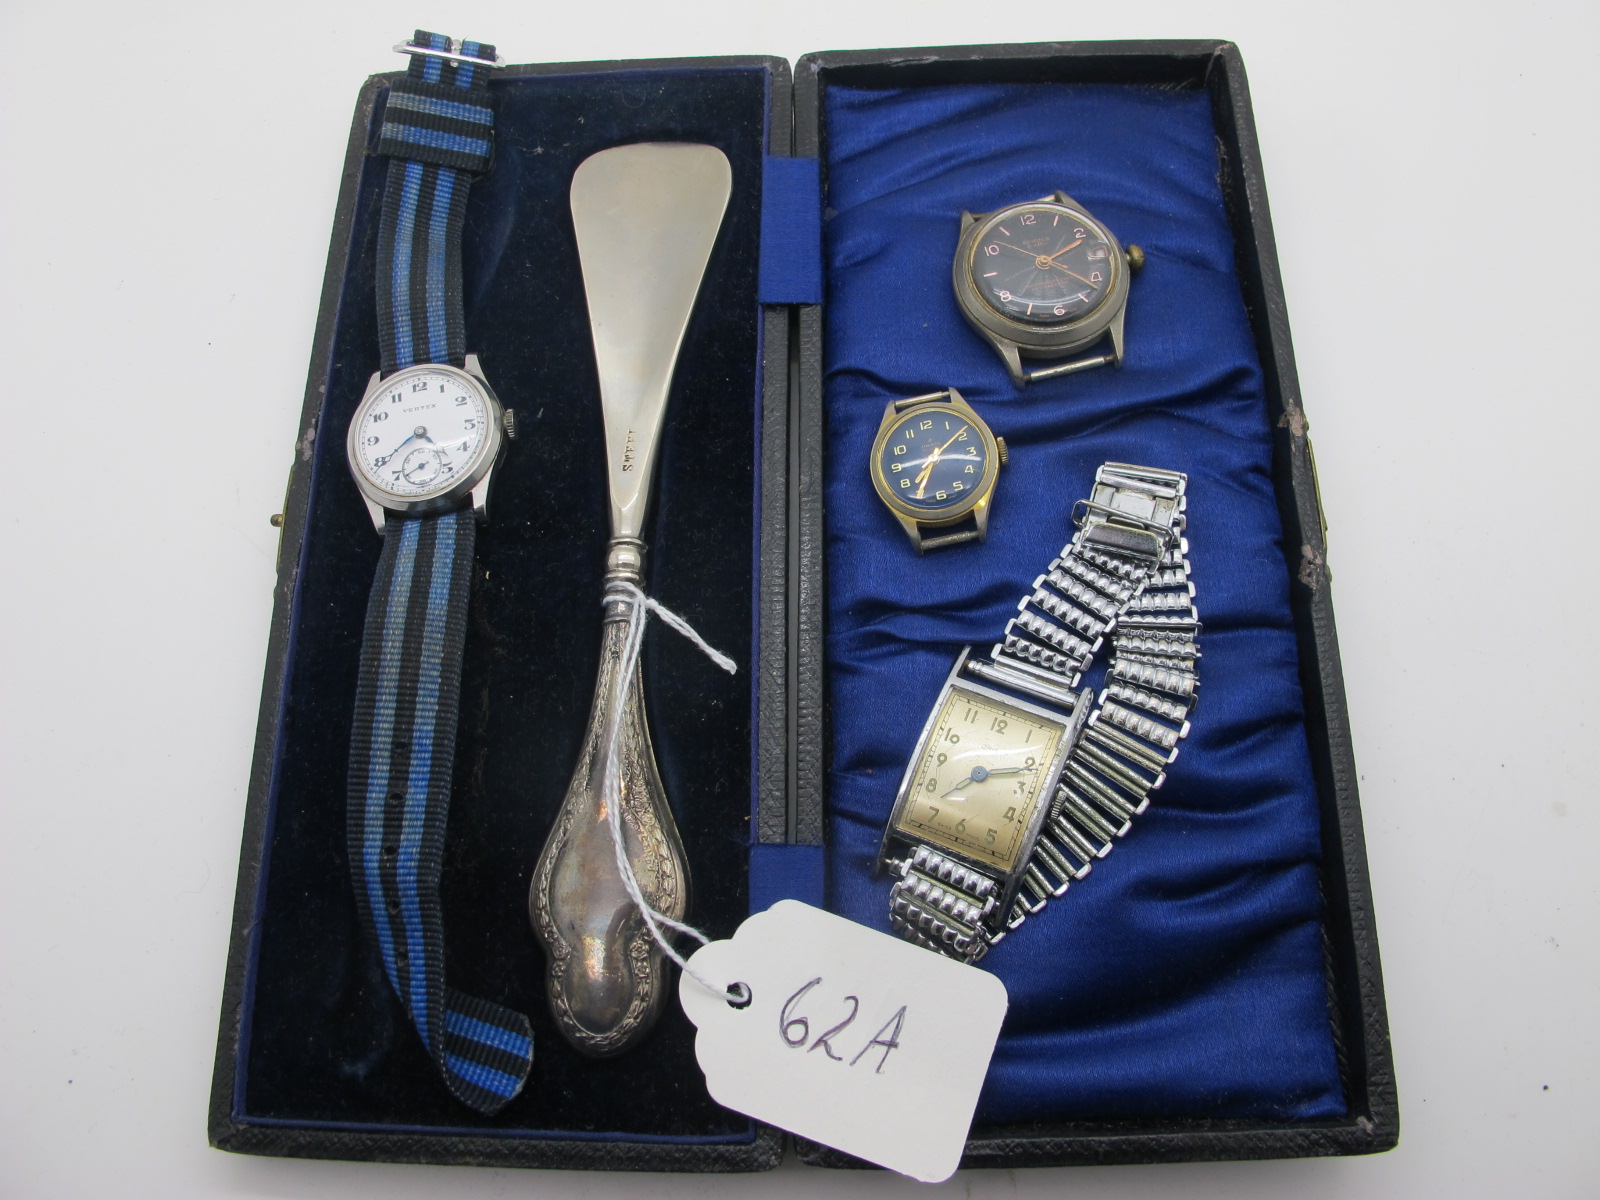 Vintage Oris and Another Gent's Wristwatch, ladies and gent's wristwatch heads (no straps); a